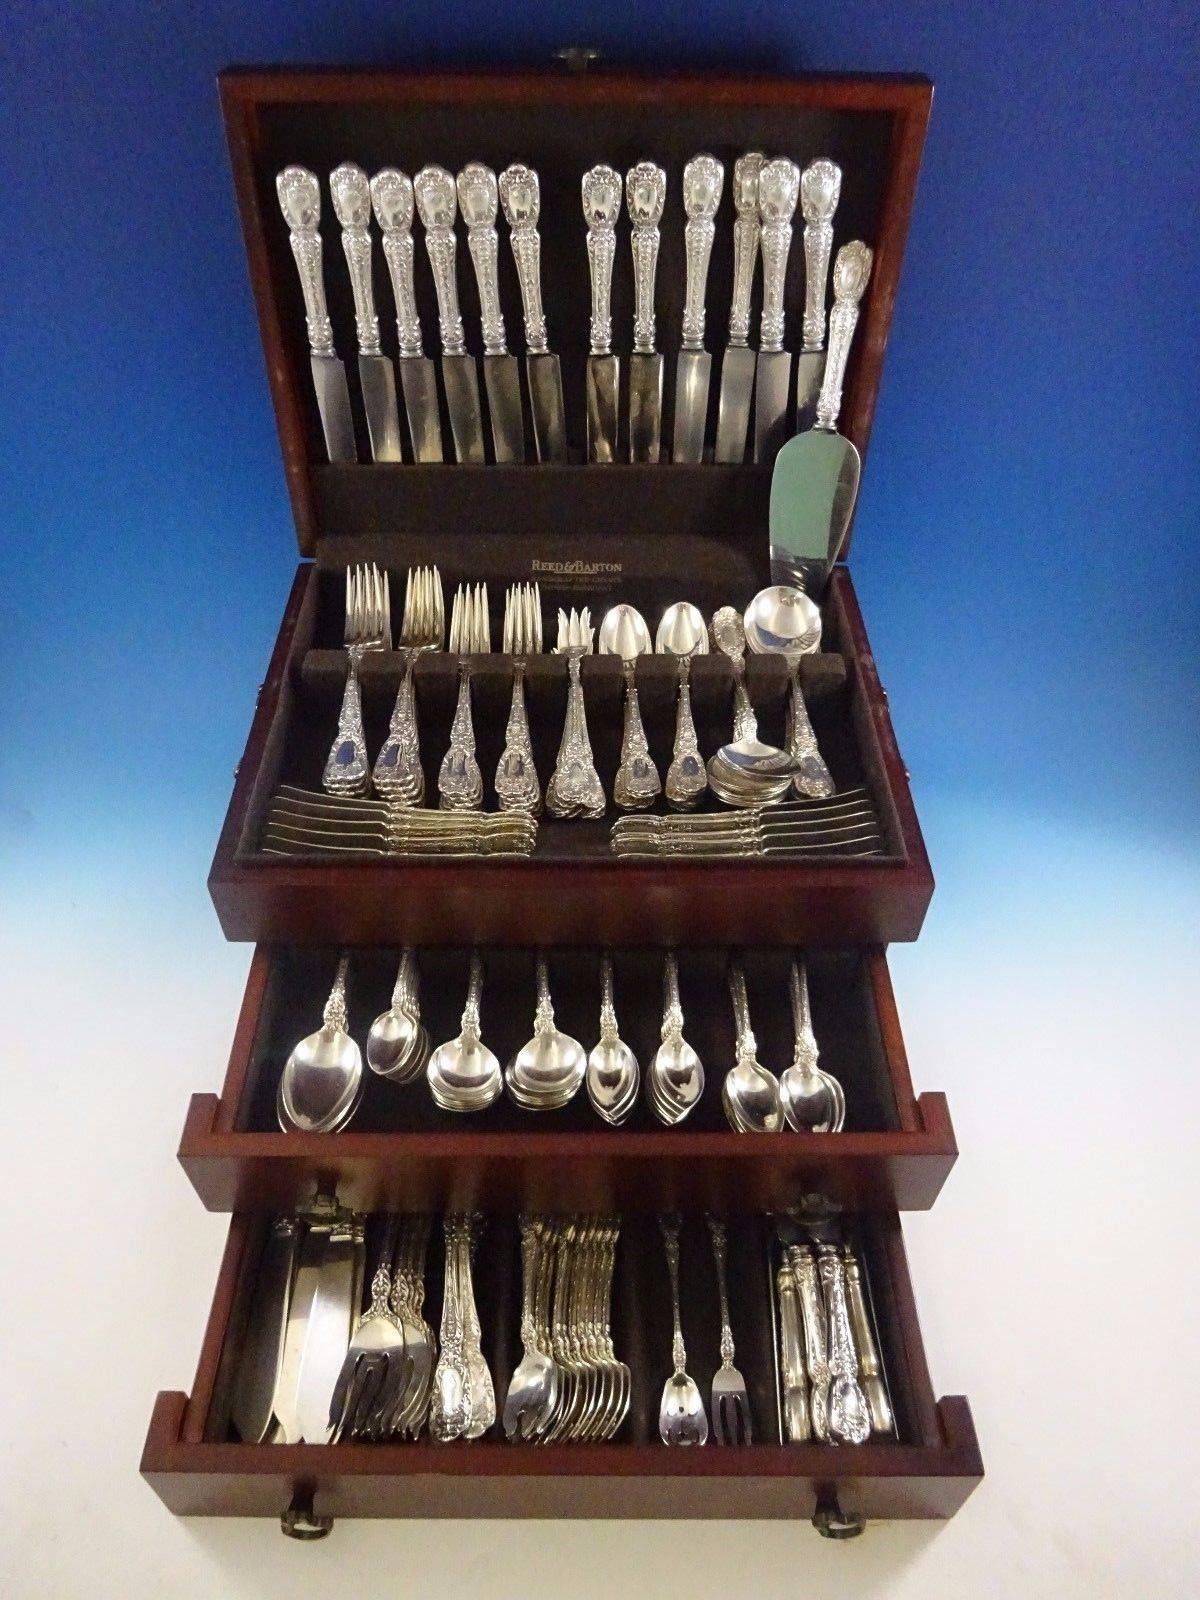 Impressive, dinner and luncheon size, Florentine by Gorham sterling silver flatware set- 195 pieces. This set includes:

12 dinner knives, 9 5/8